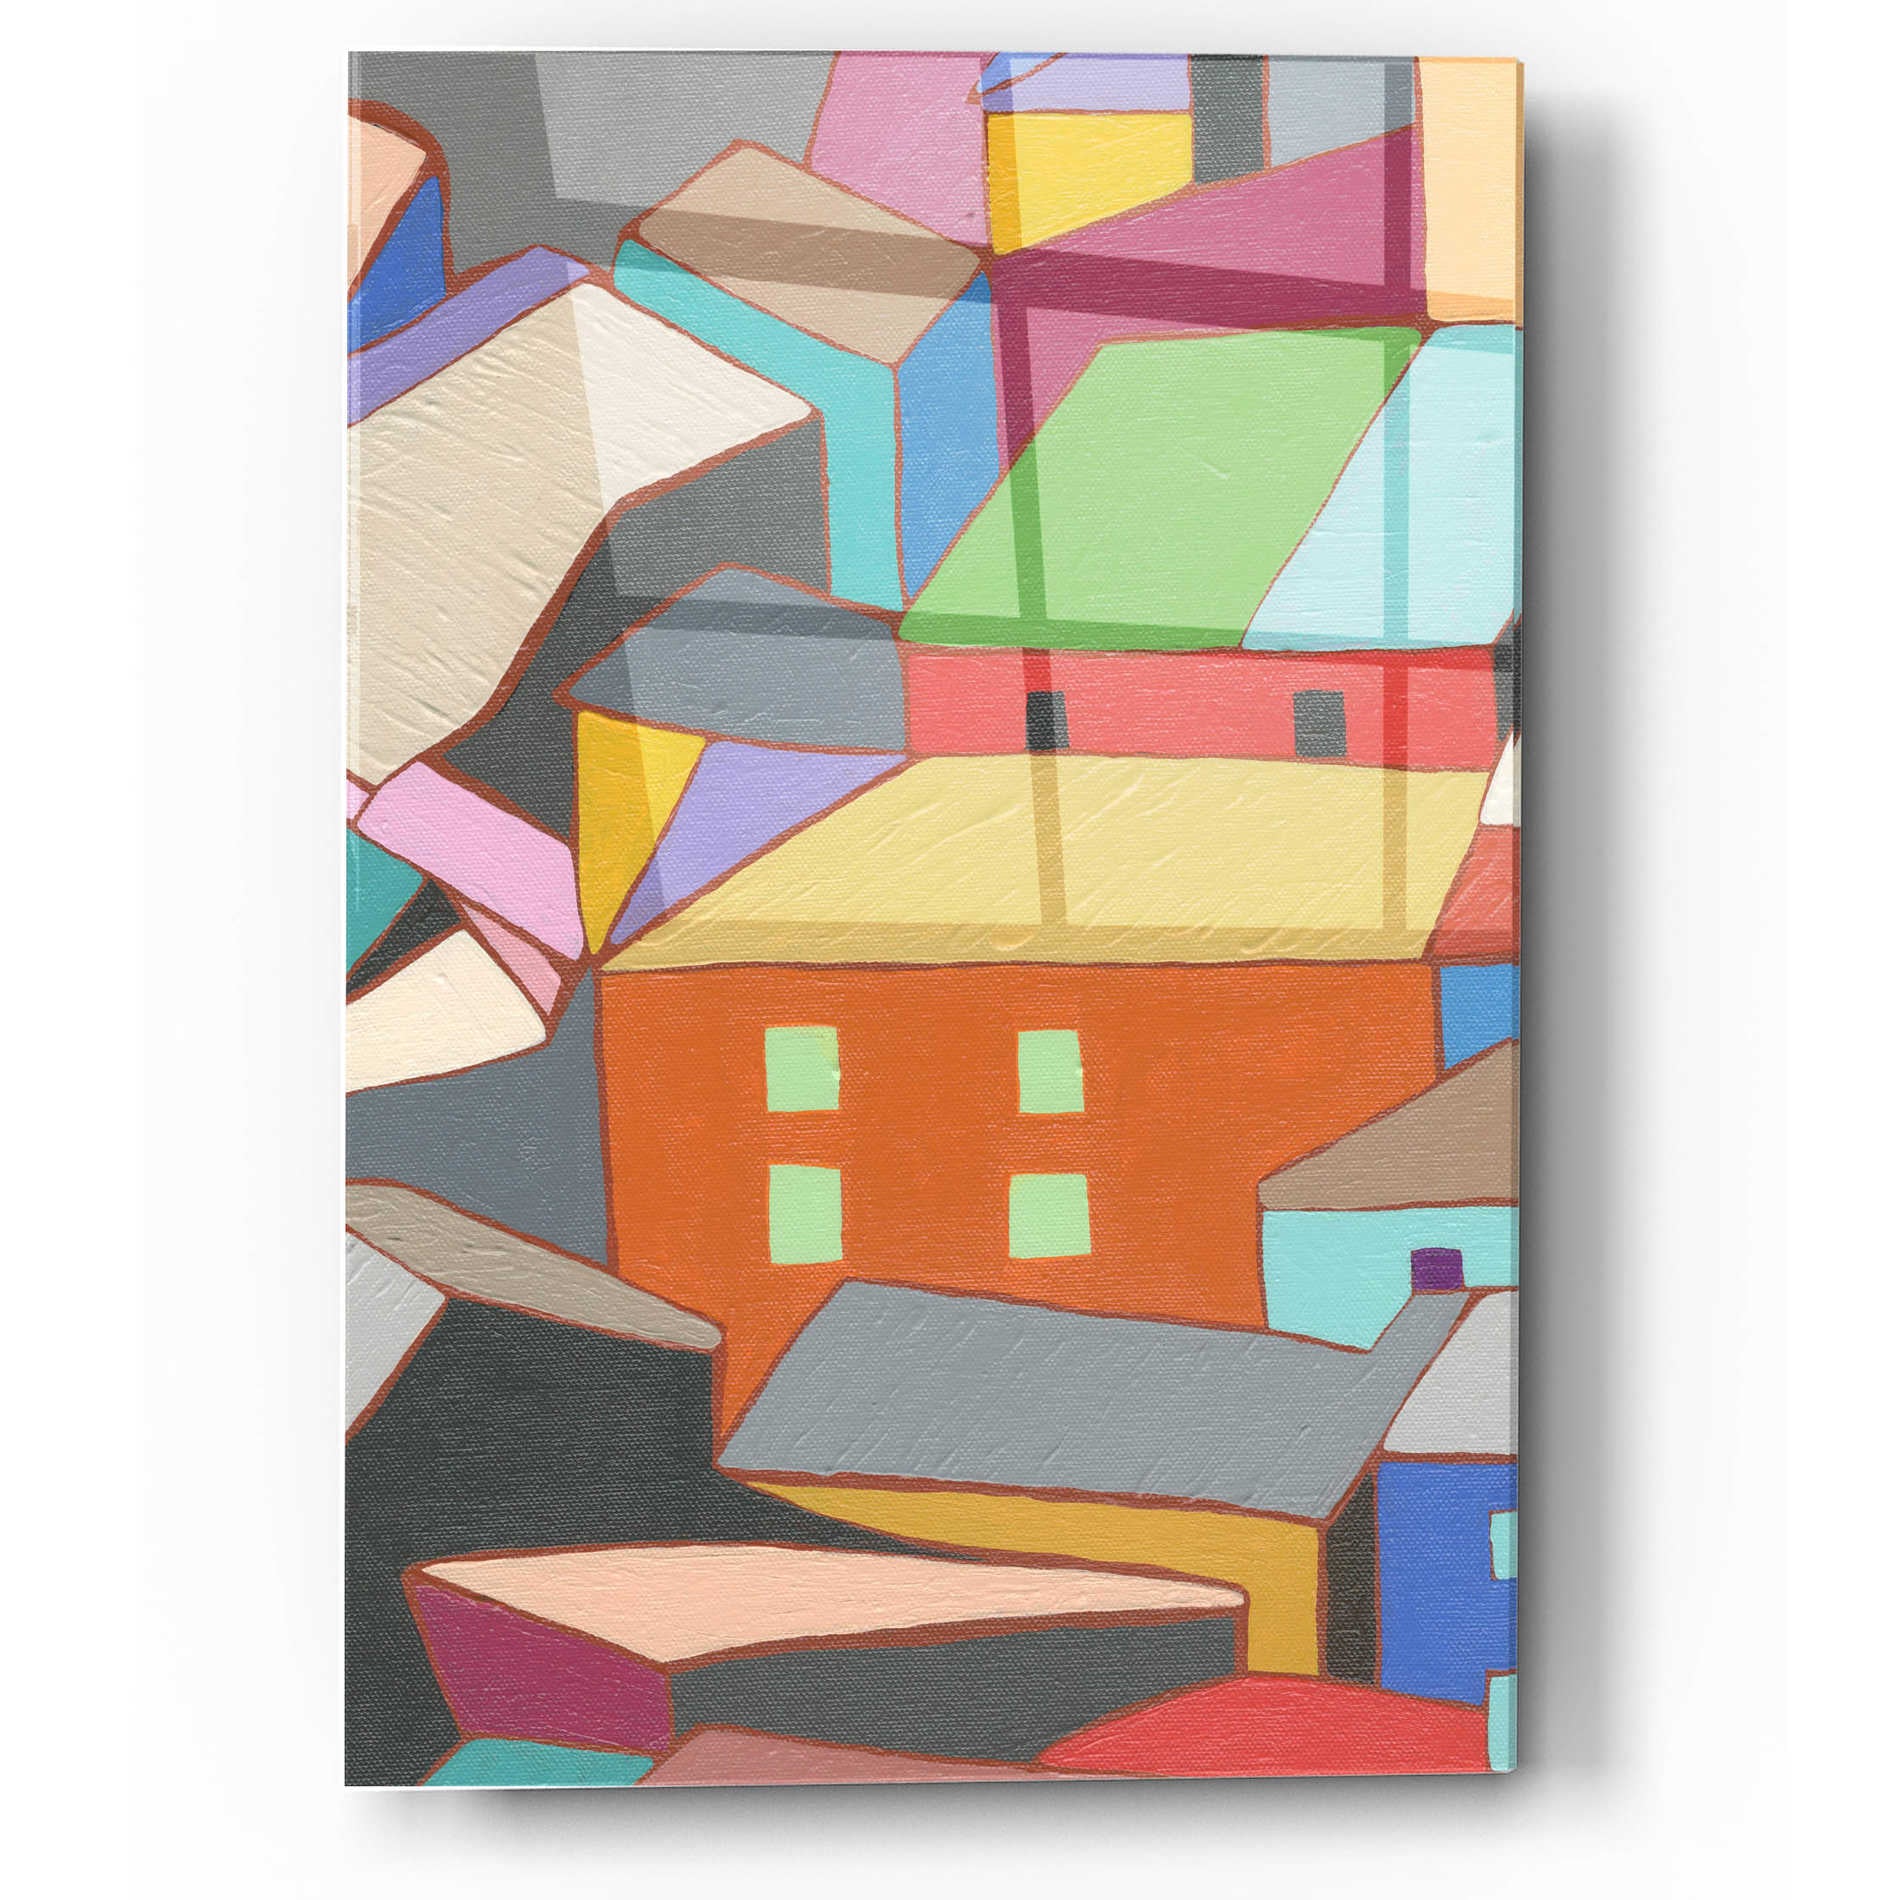 Epic Art 'Rooftops in Color III' by Nikki Galapon, Acrylic Glass Wall Art,12x16